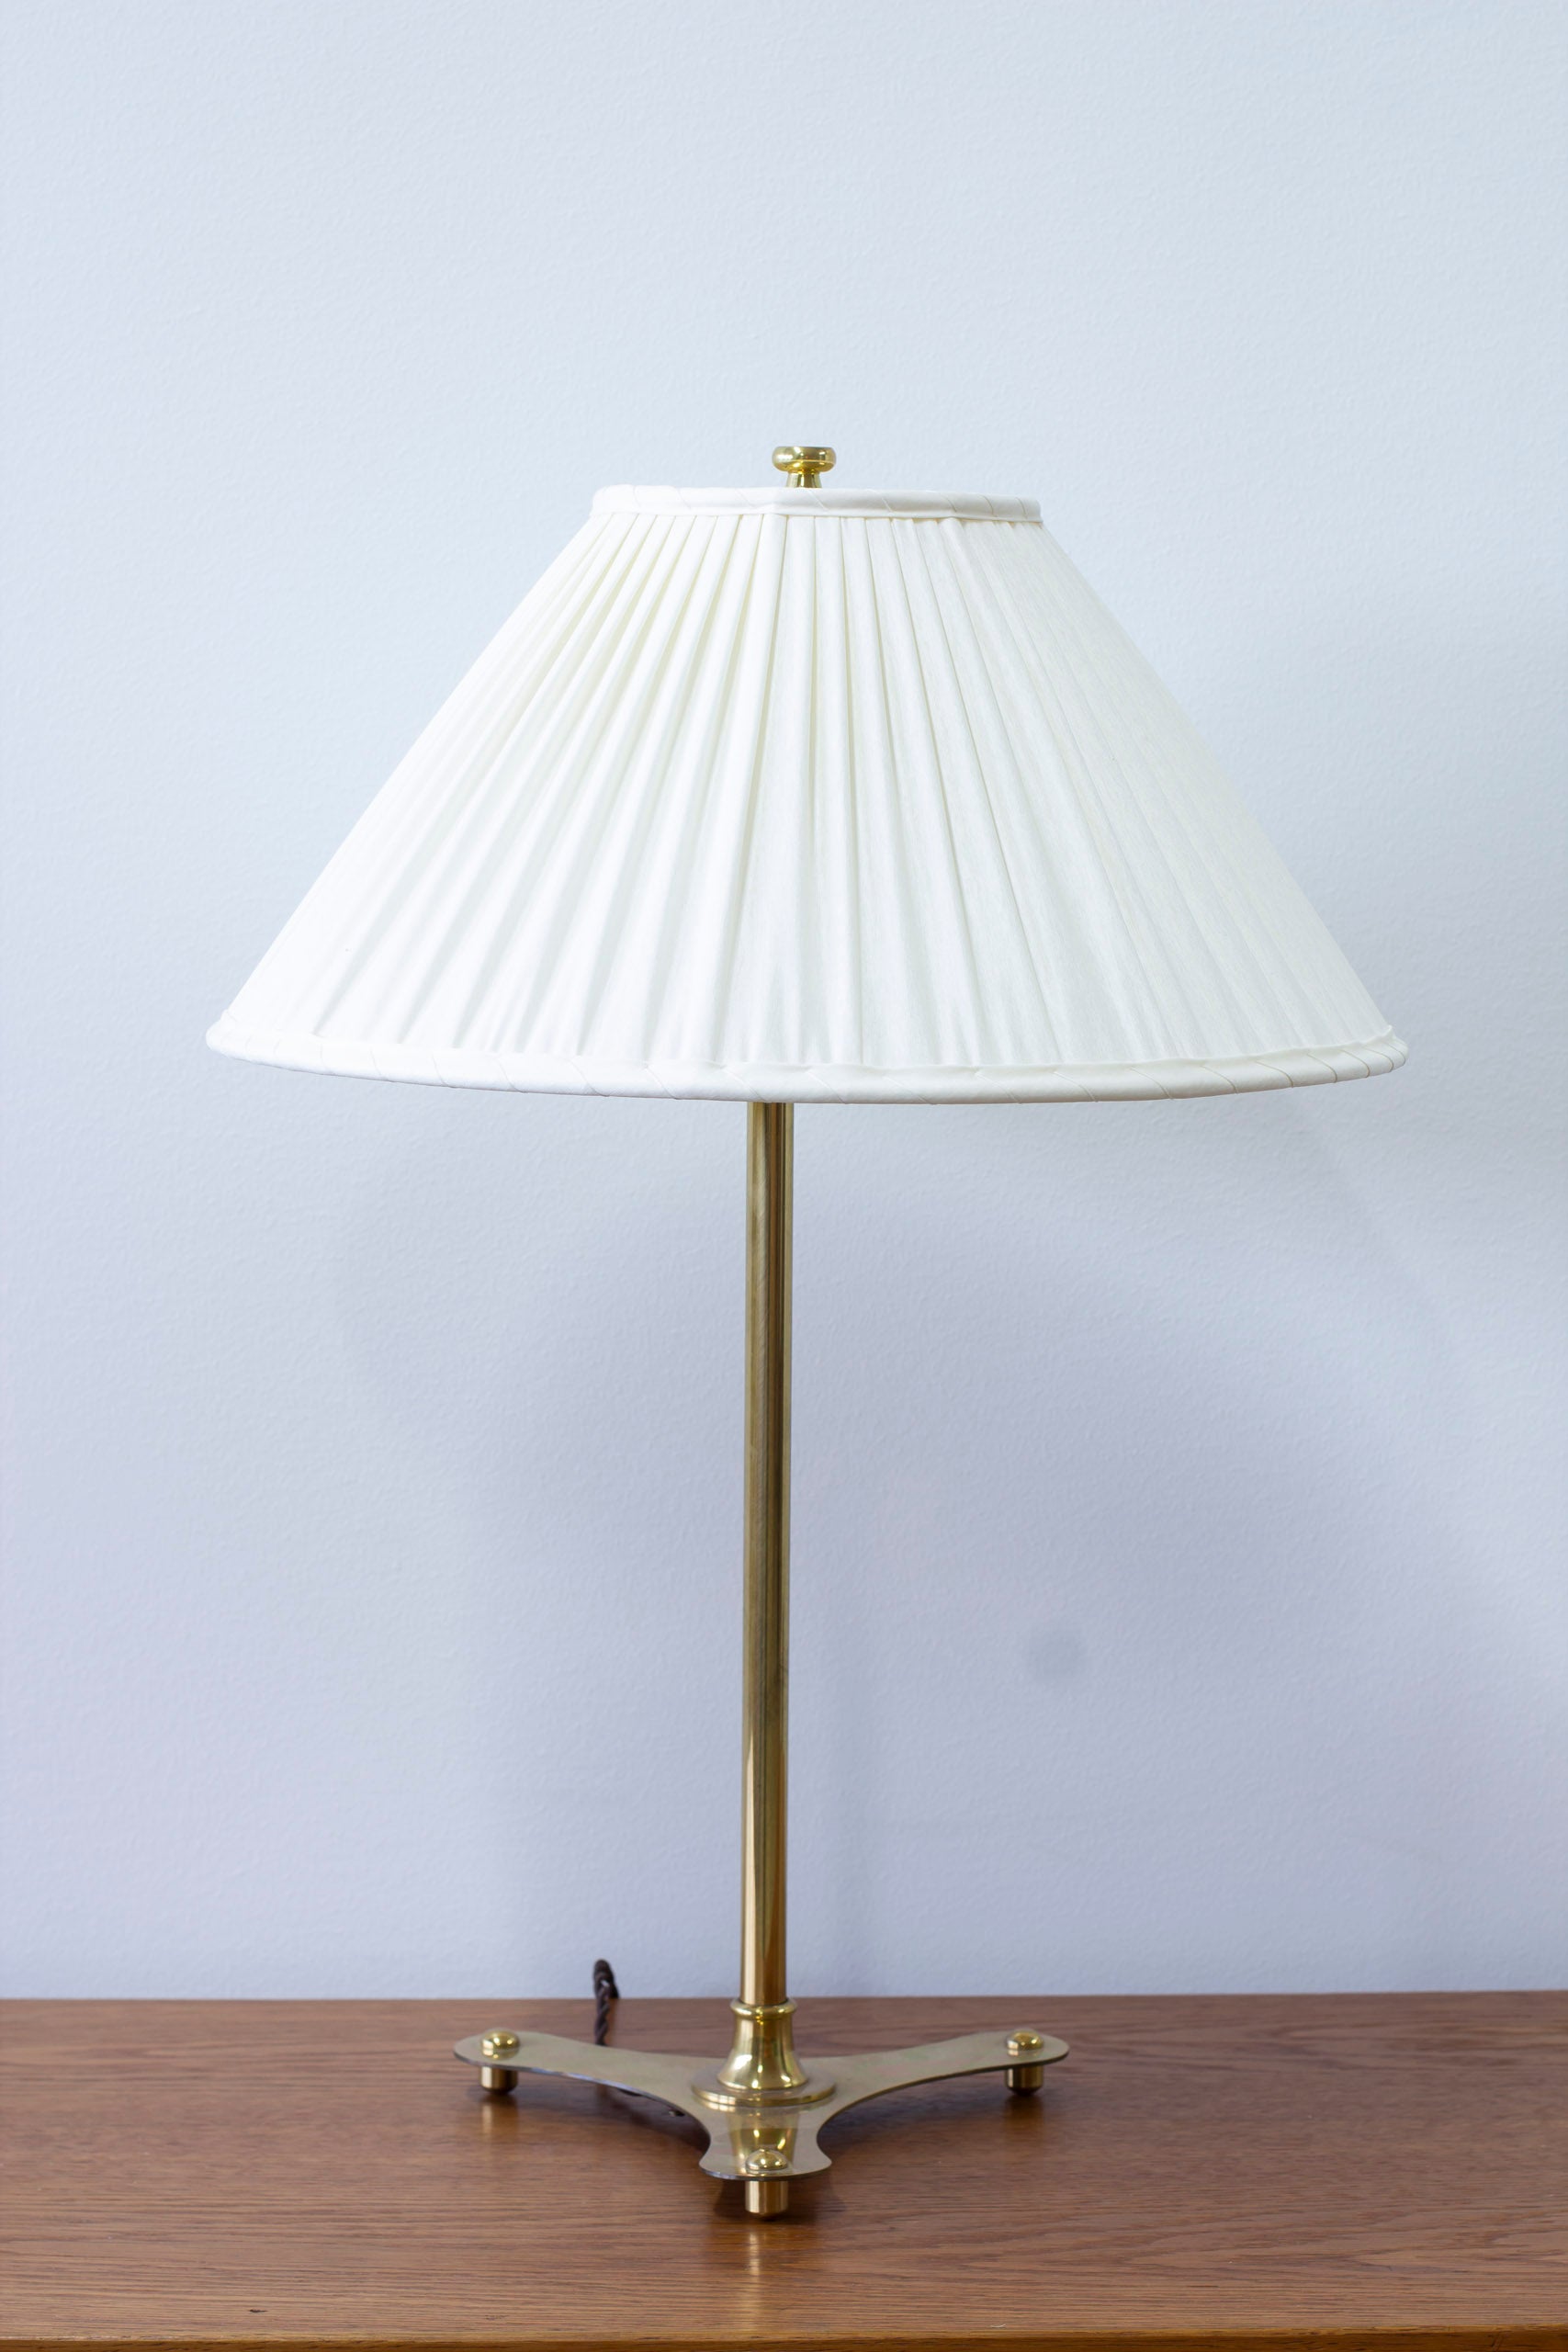 Table lamp model 2467 designed by Josef Frank. Produced in Sweden by Svenskt Tenn. designed in 1938, this piece of a later manufacturing. Brass and original shade re-sewn with single pleating in chintz fabric. Very good vintage condition with few